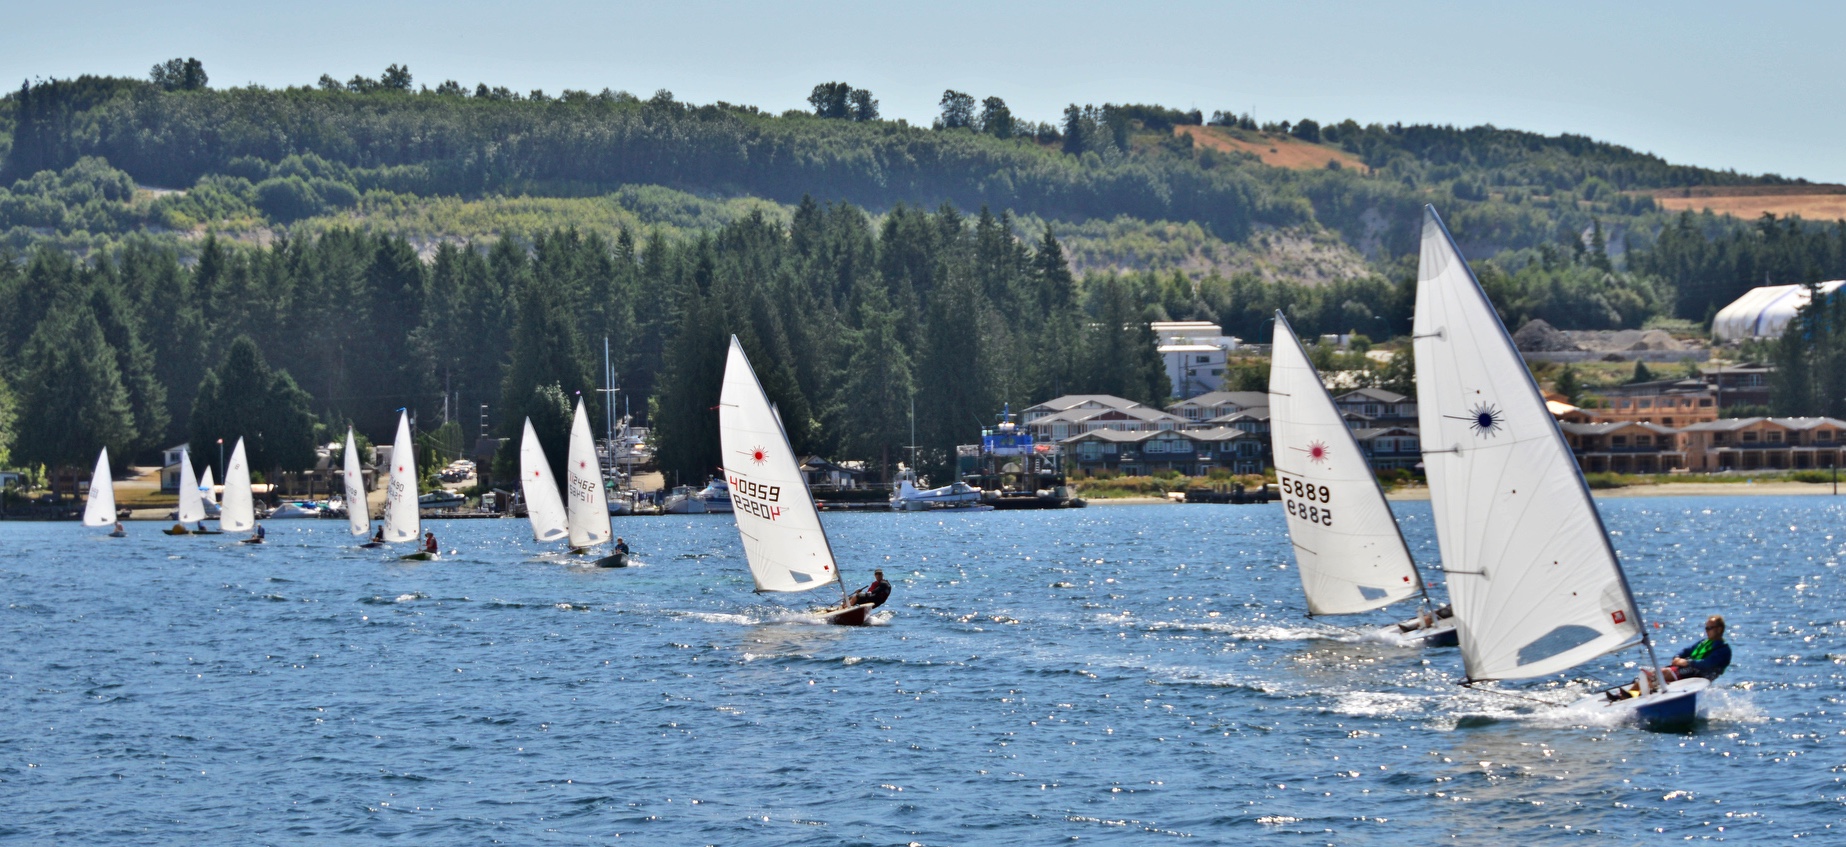 Sailors lead out from the Marina for the start of the 6th Annual Poise Cove Regatta July 16th, 2017